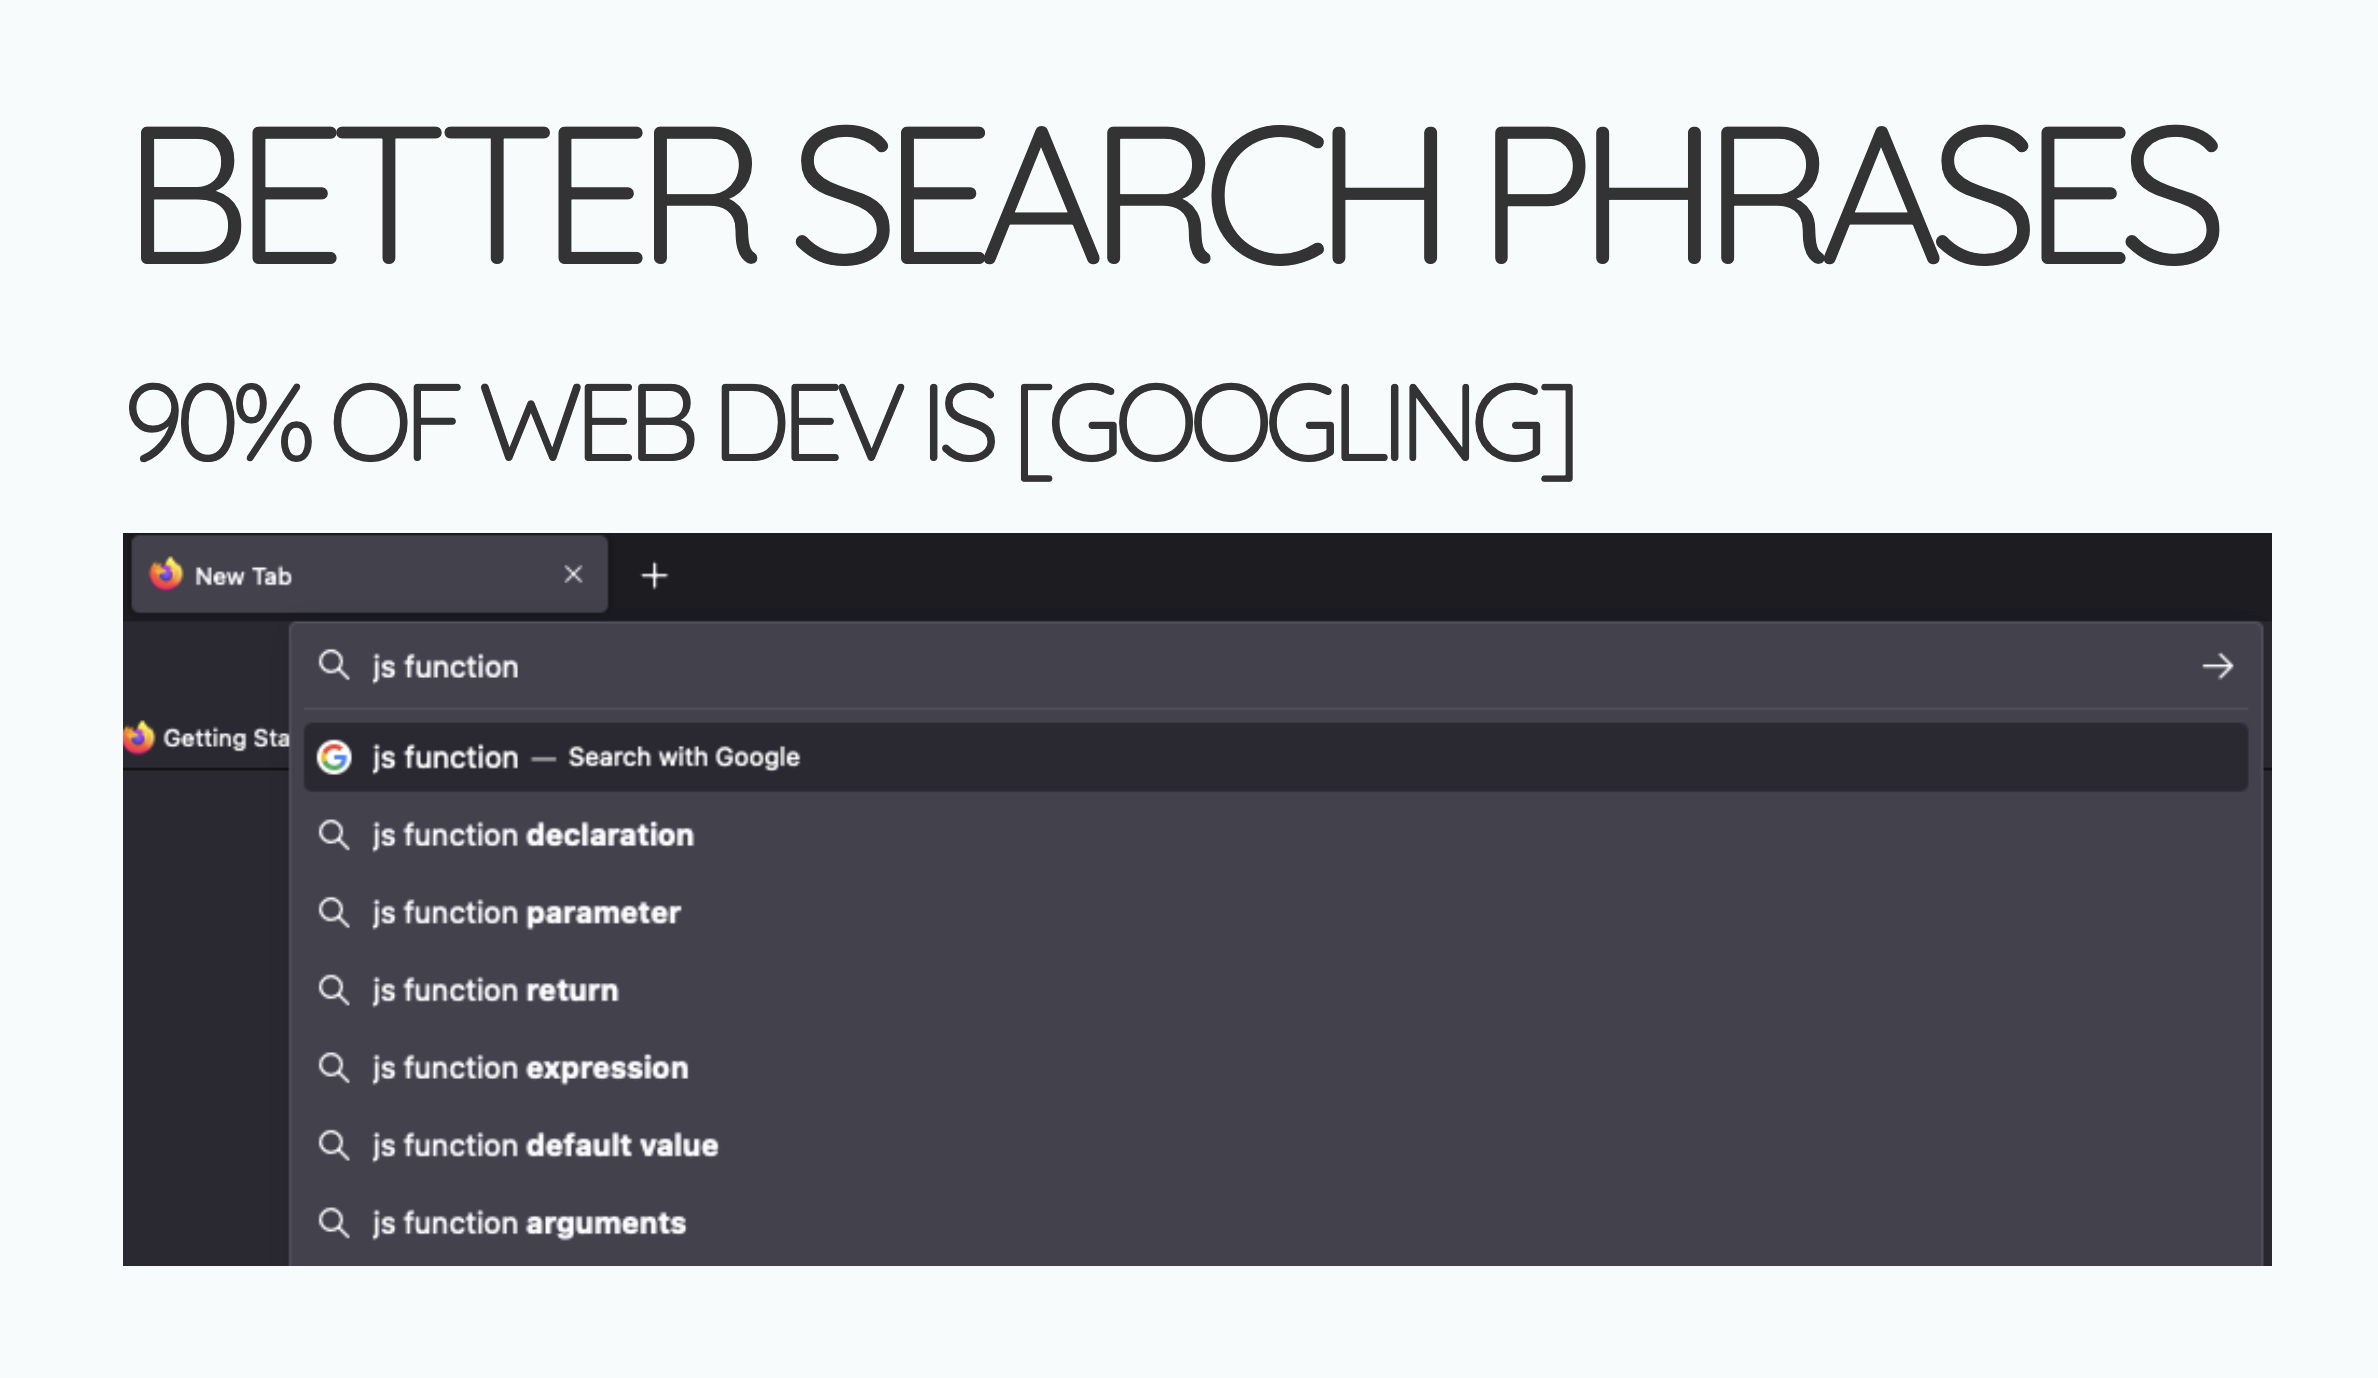 Slides: Better Search Phrases